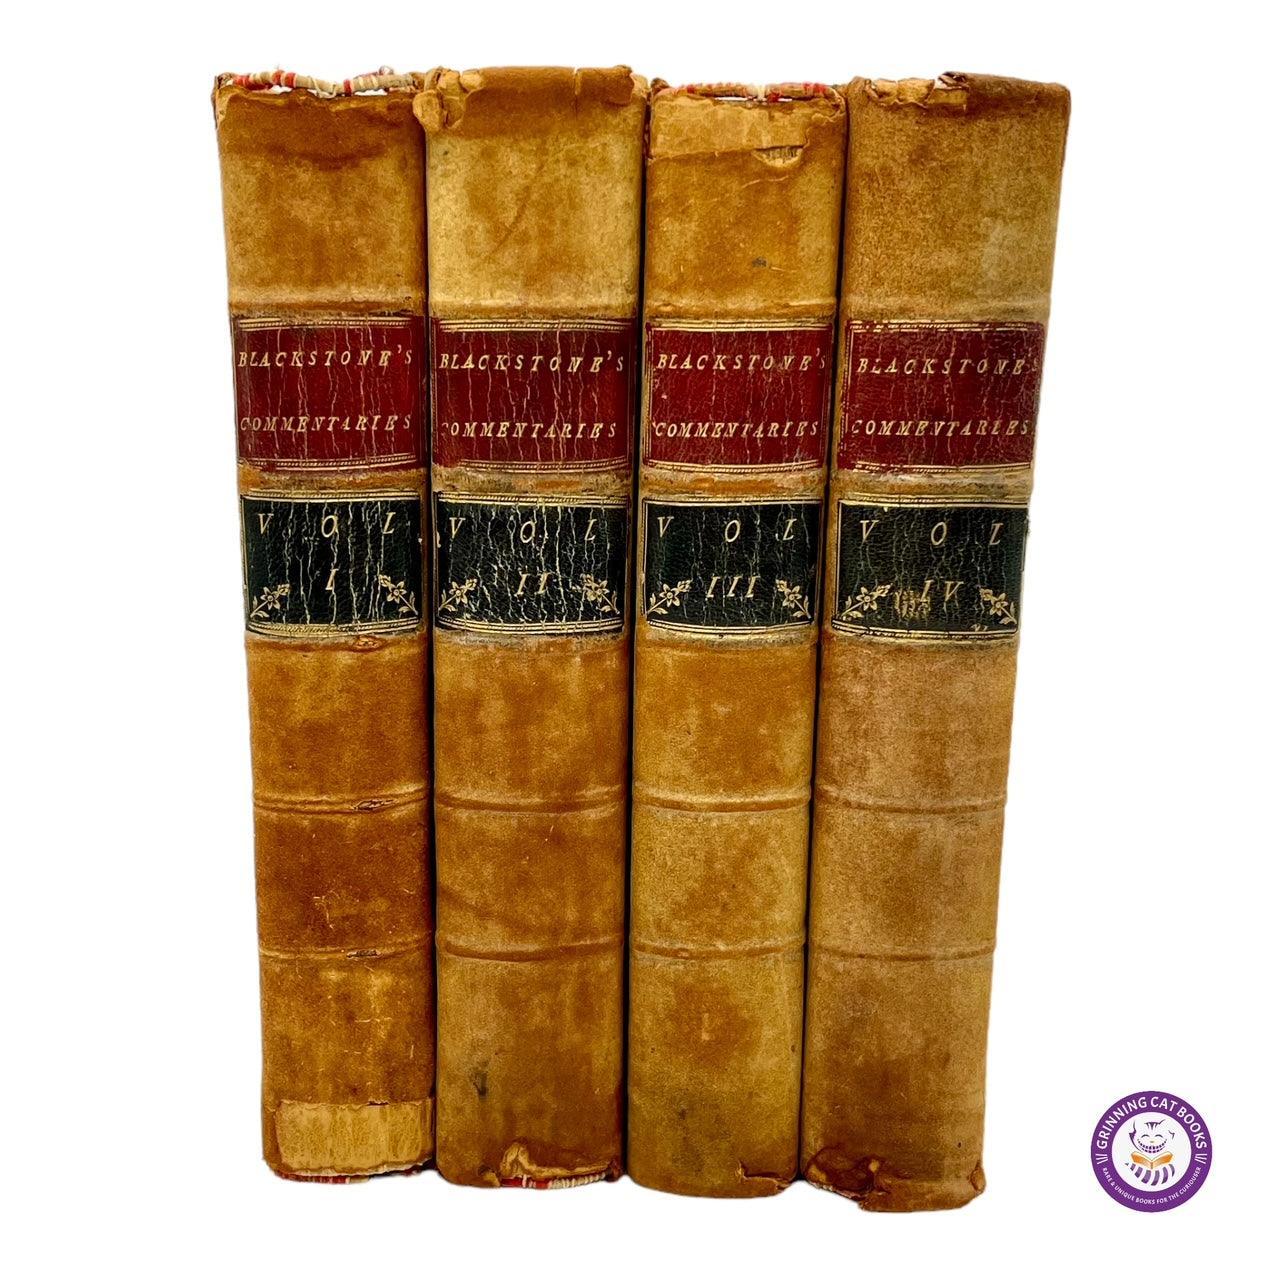 Commentaries on the Laws of England (1787), 4 volumes, complete - Grinning Cat Books - LAW - LAW